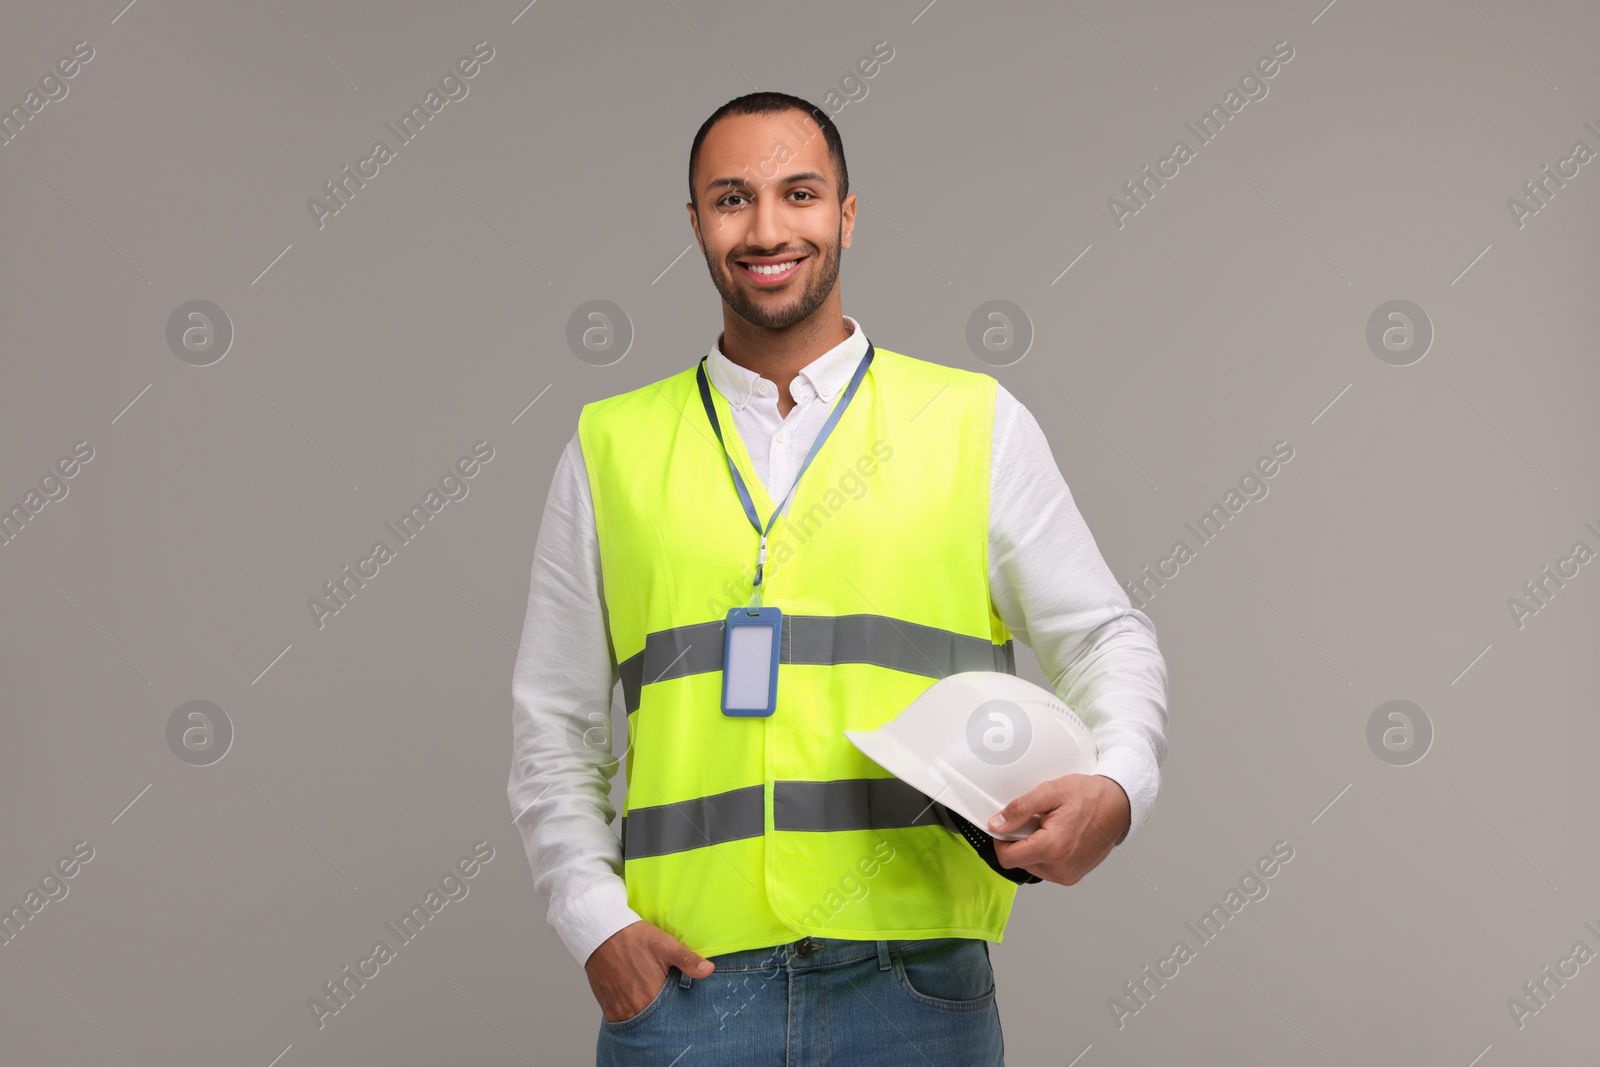 Photo of Engineer with hard hat and badge on grey background